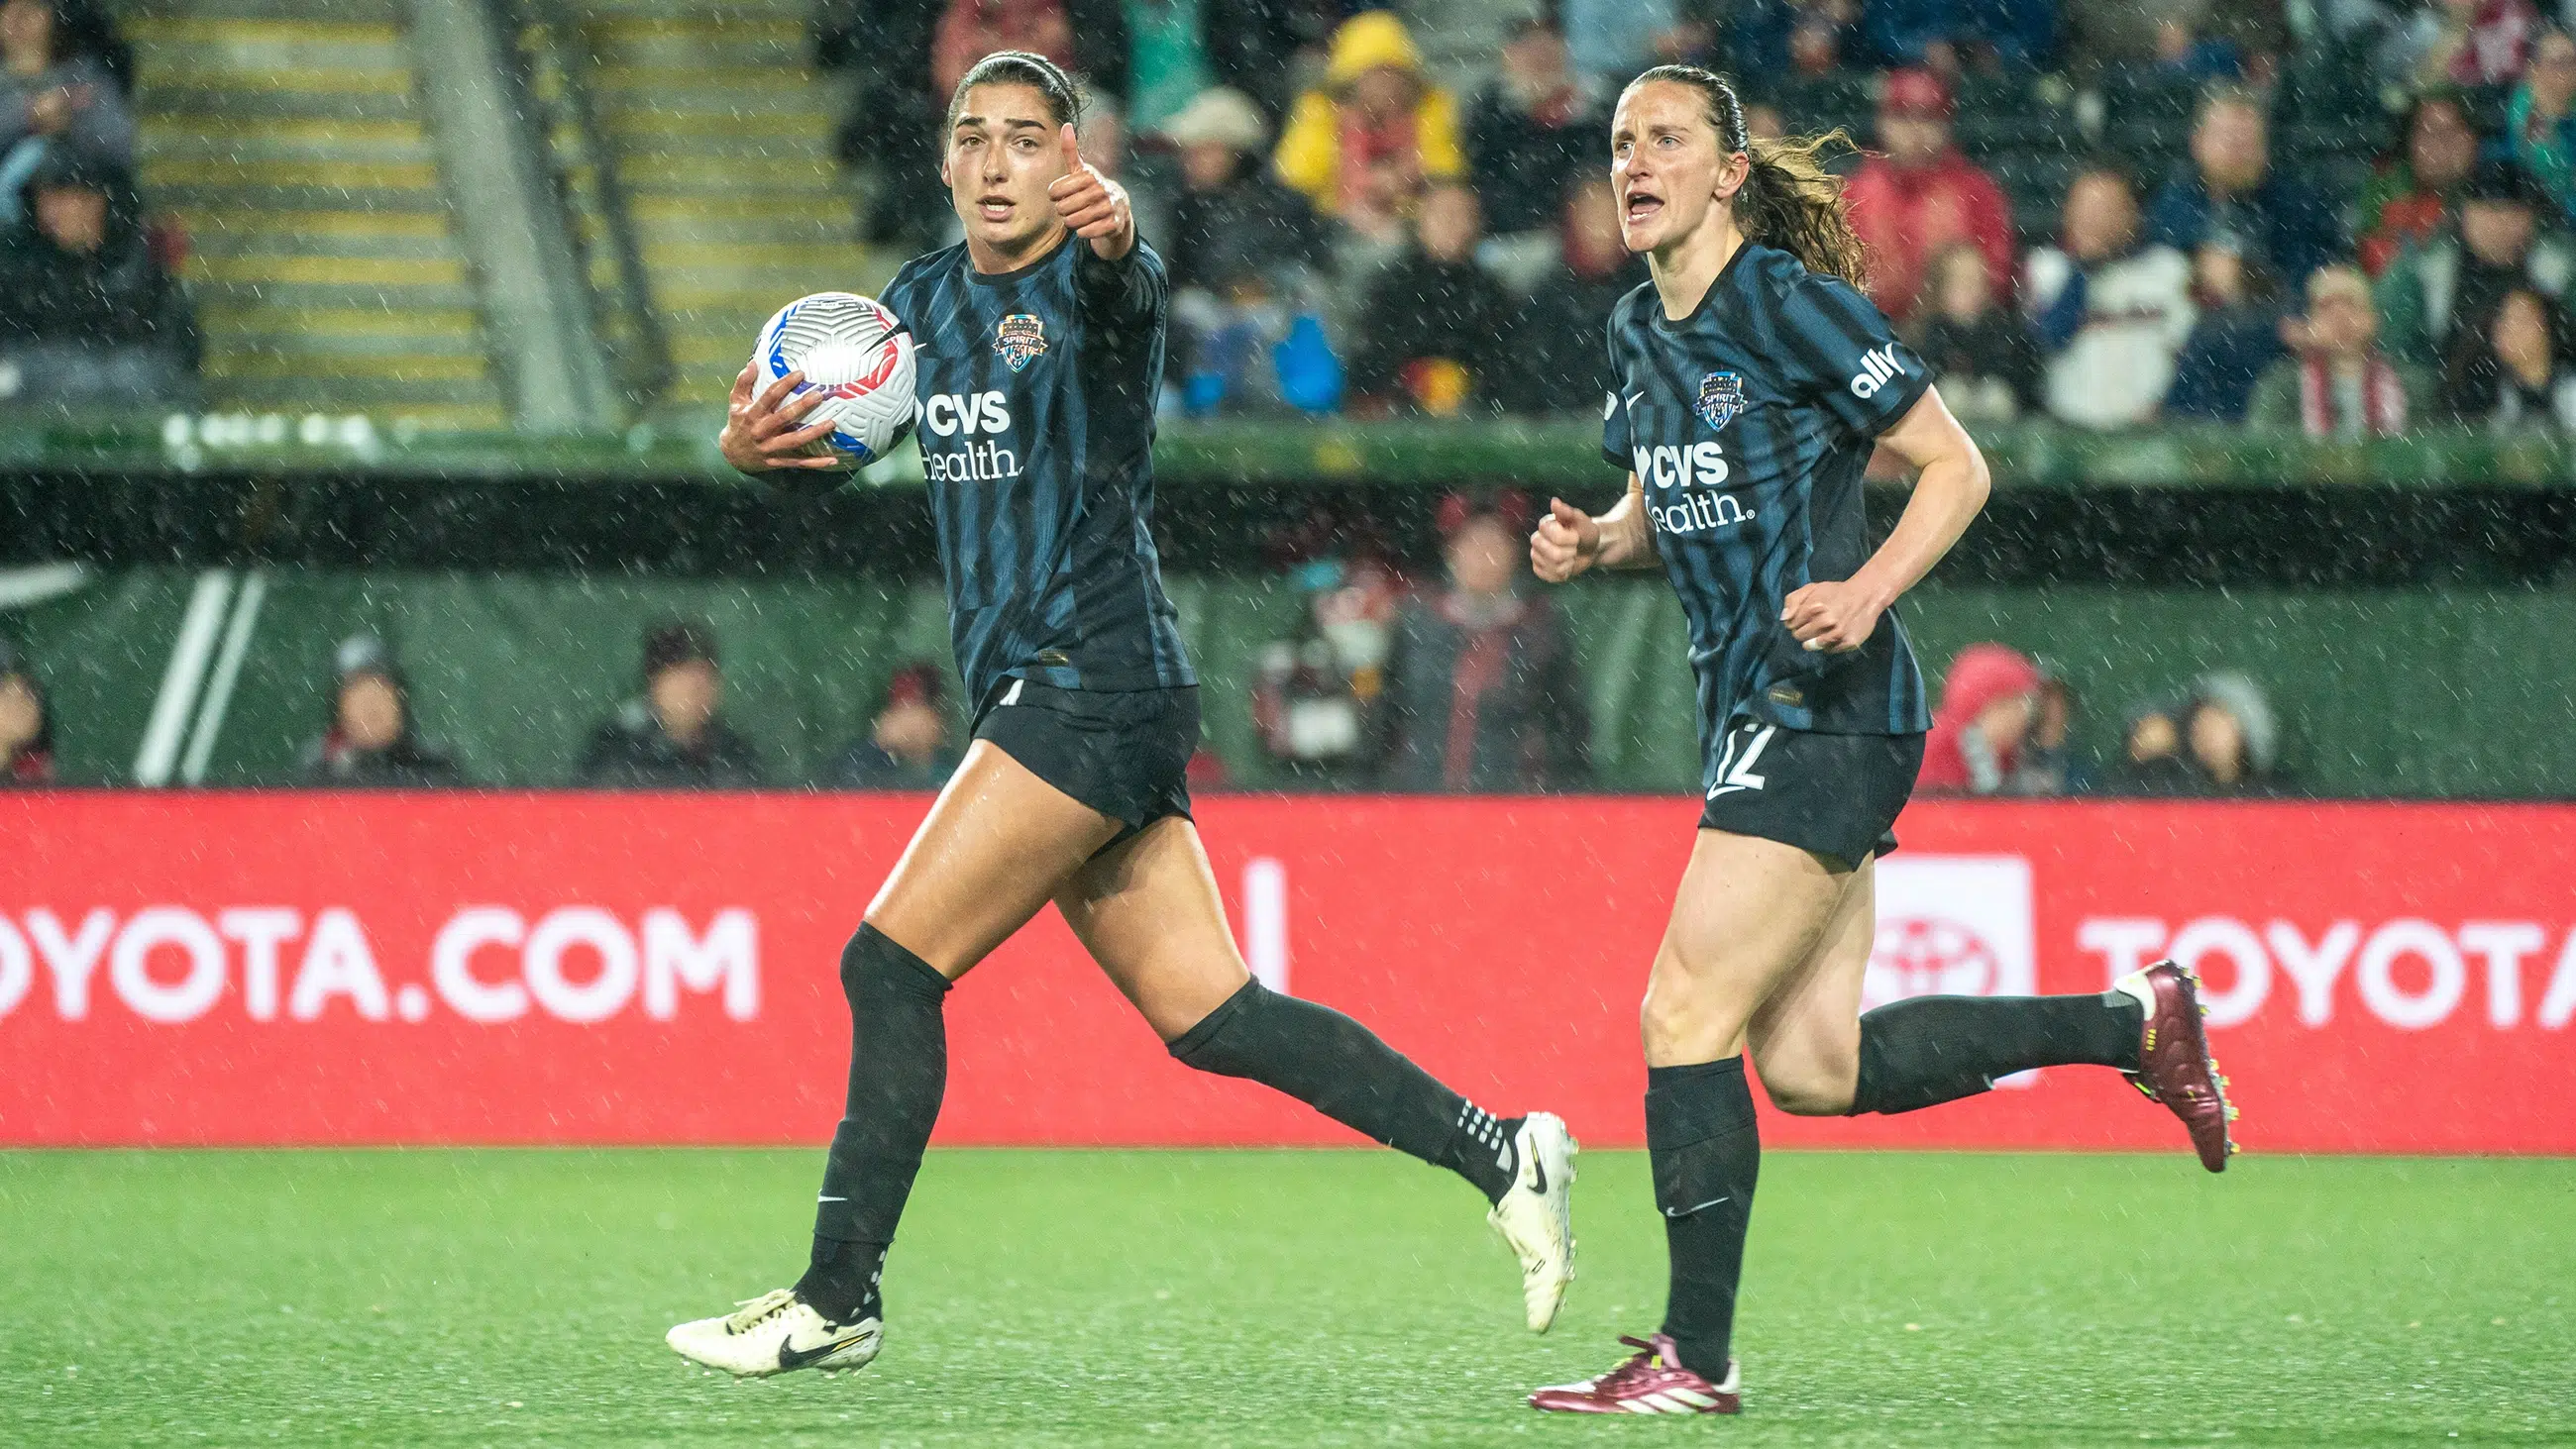 Lena Silano holds the soccer ball with one hand and gives a thumbs up with the other. Andi Sullivan runs besides her. Both are wearing black kits.